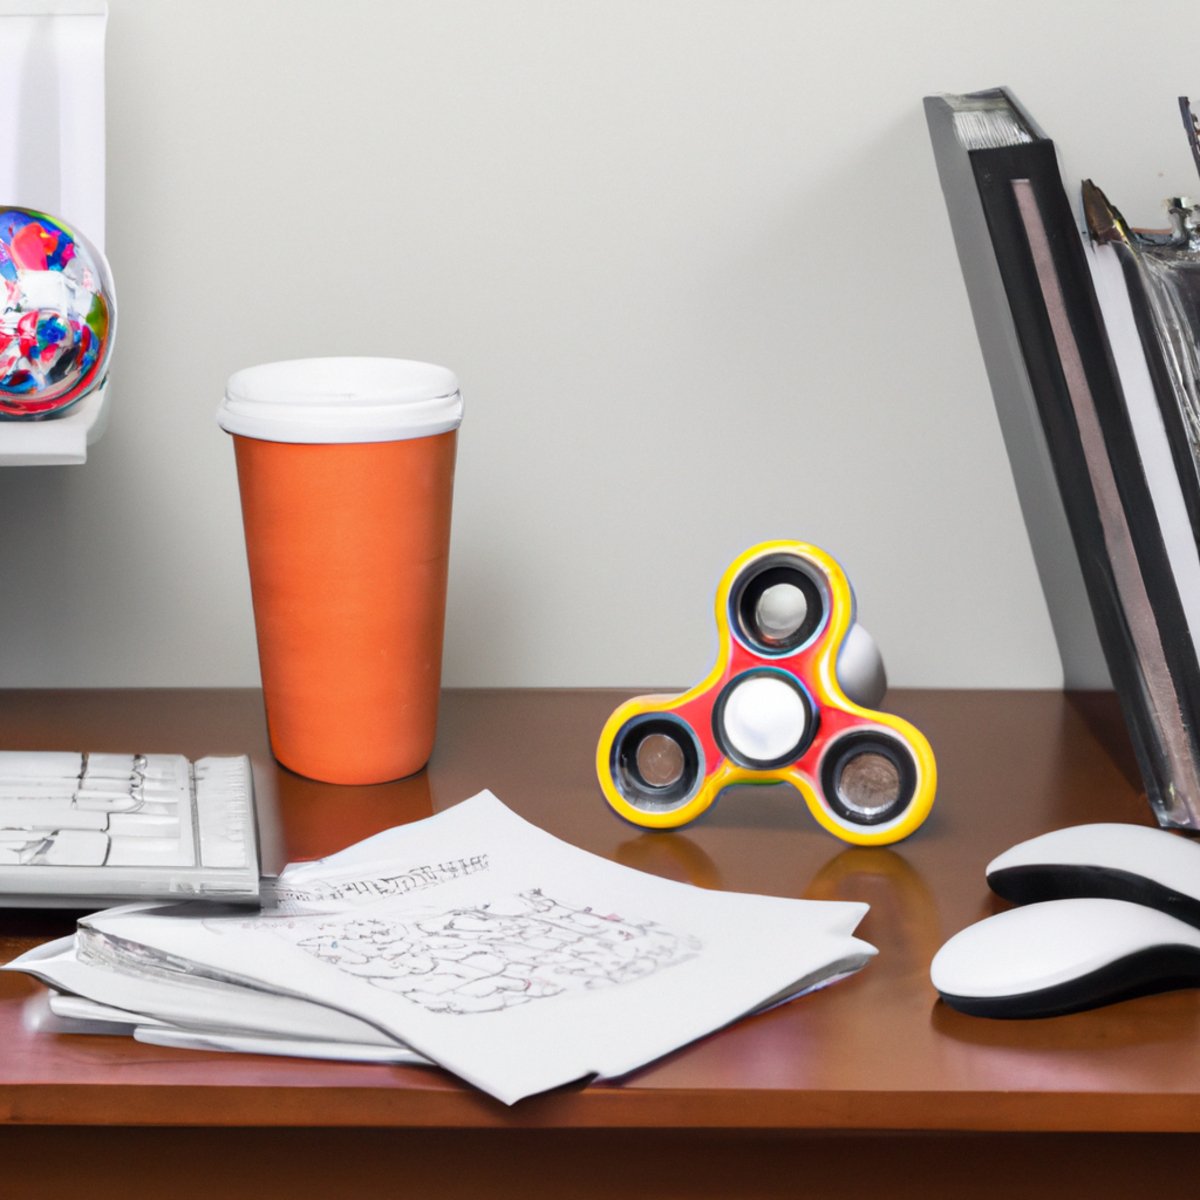 Cluttered desk with stress ball, fidget spinner, and self-help books suggests high job stress and need for stress management.